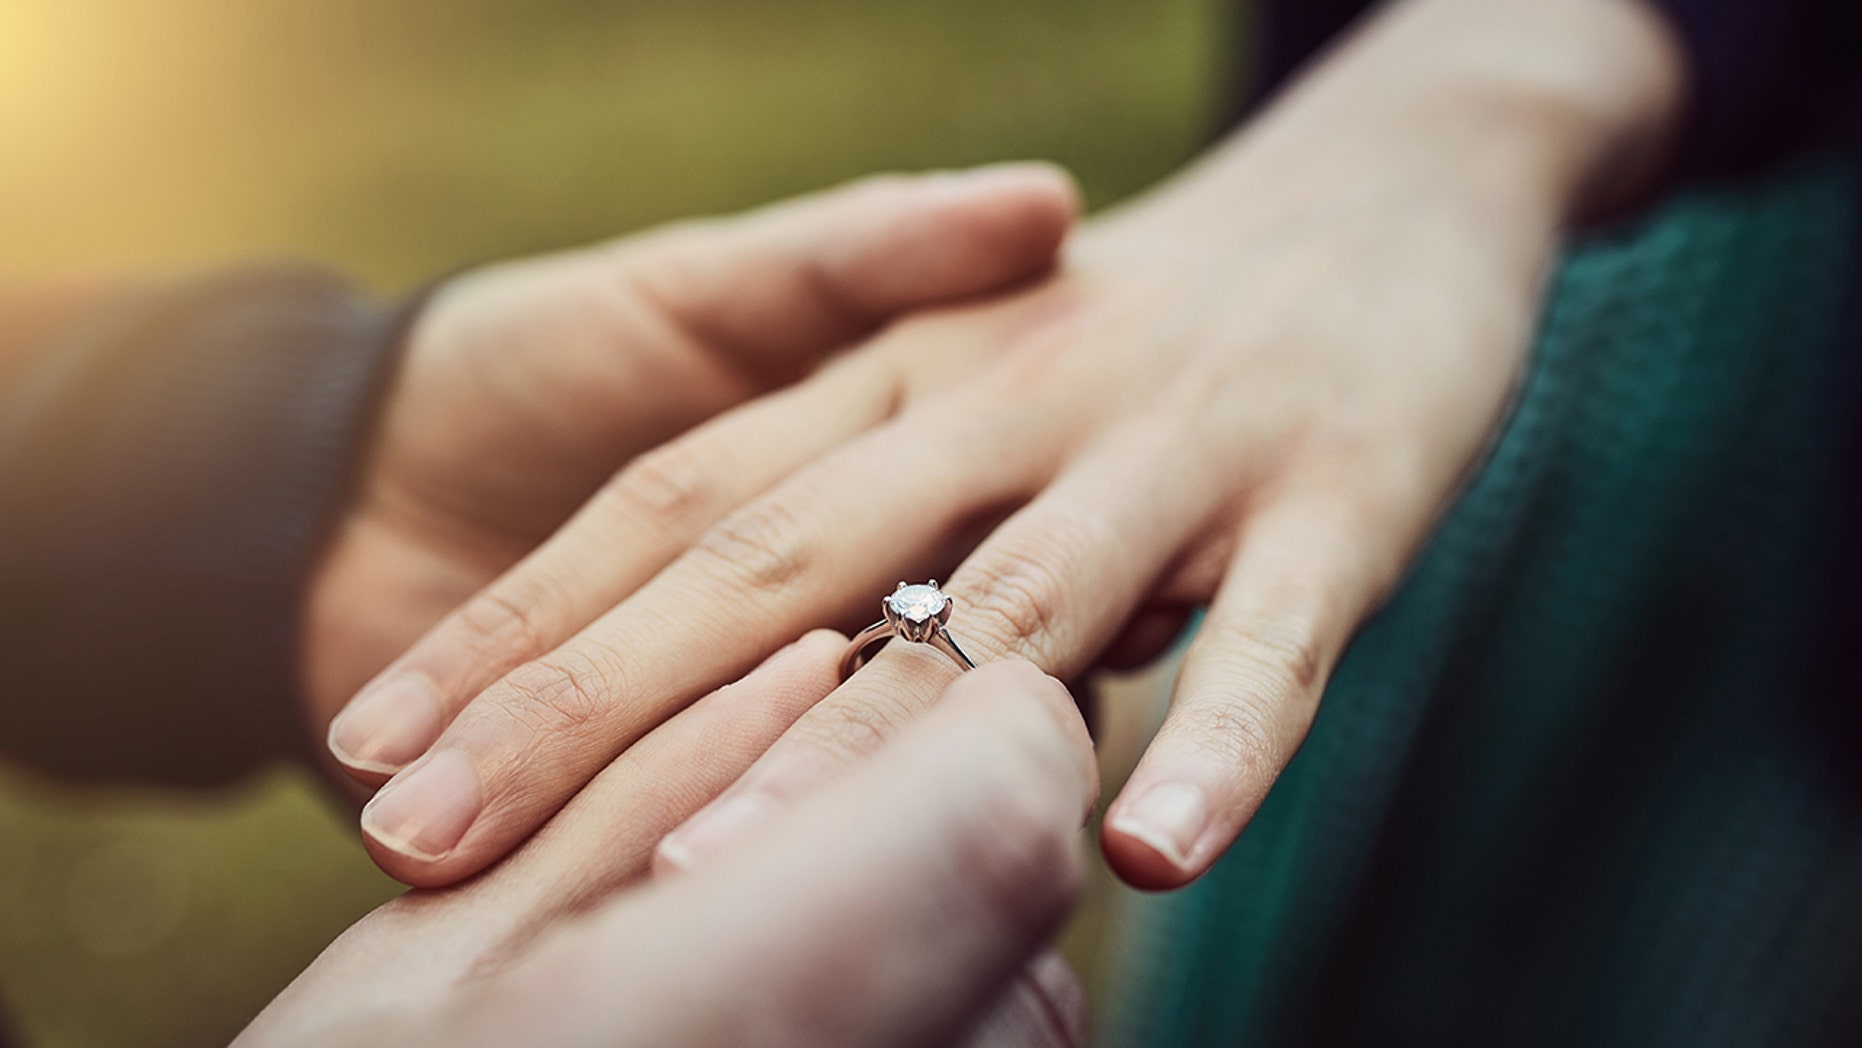 Woman Serves As Ring For Cousins Engagement Photo In Viral Moment 0939